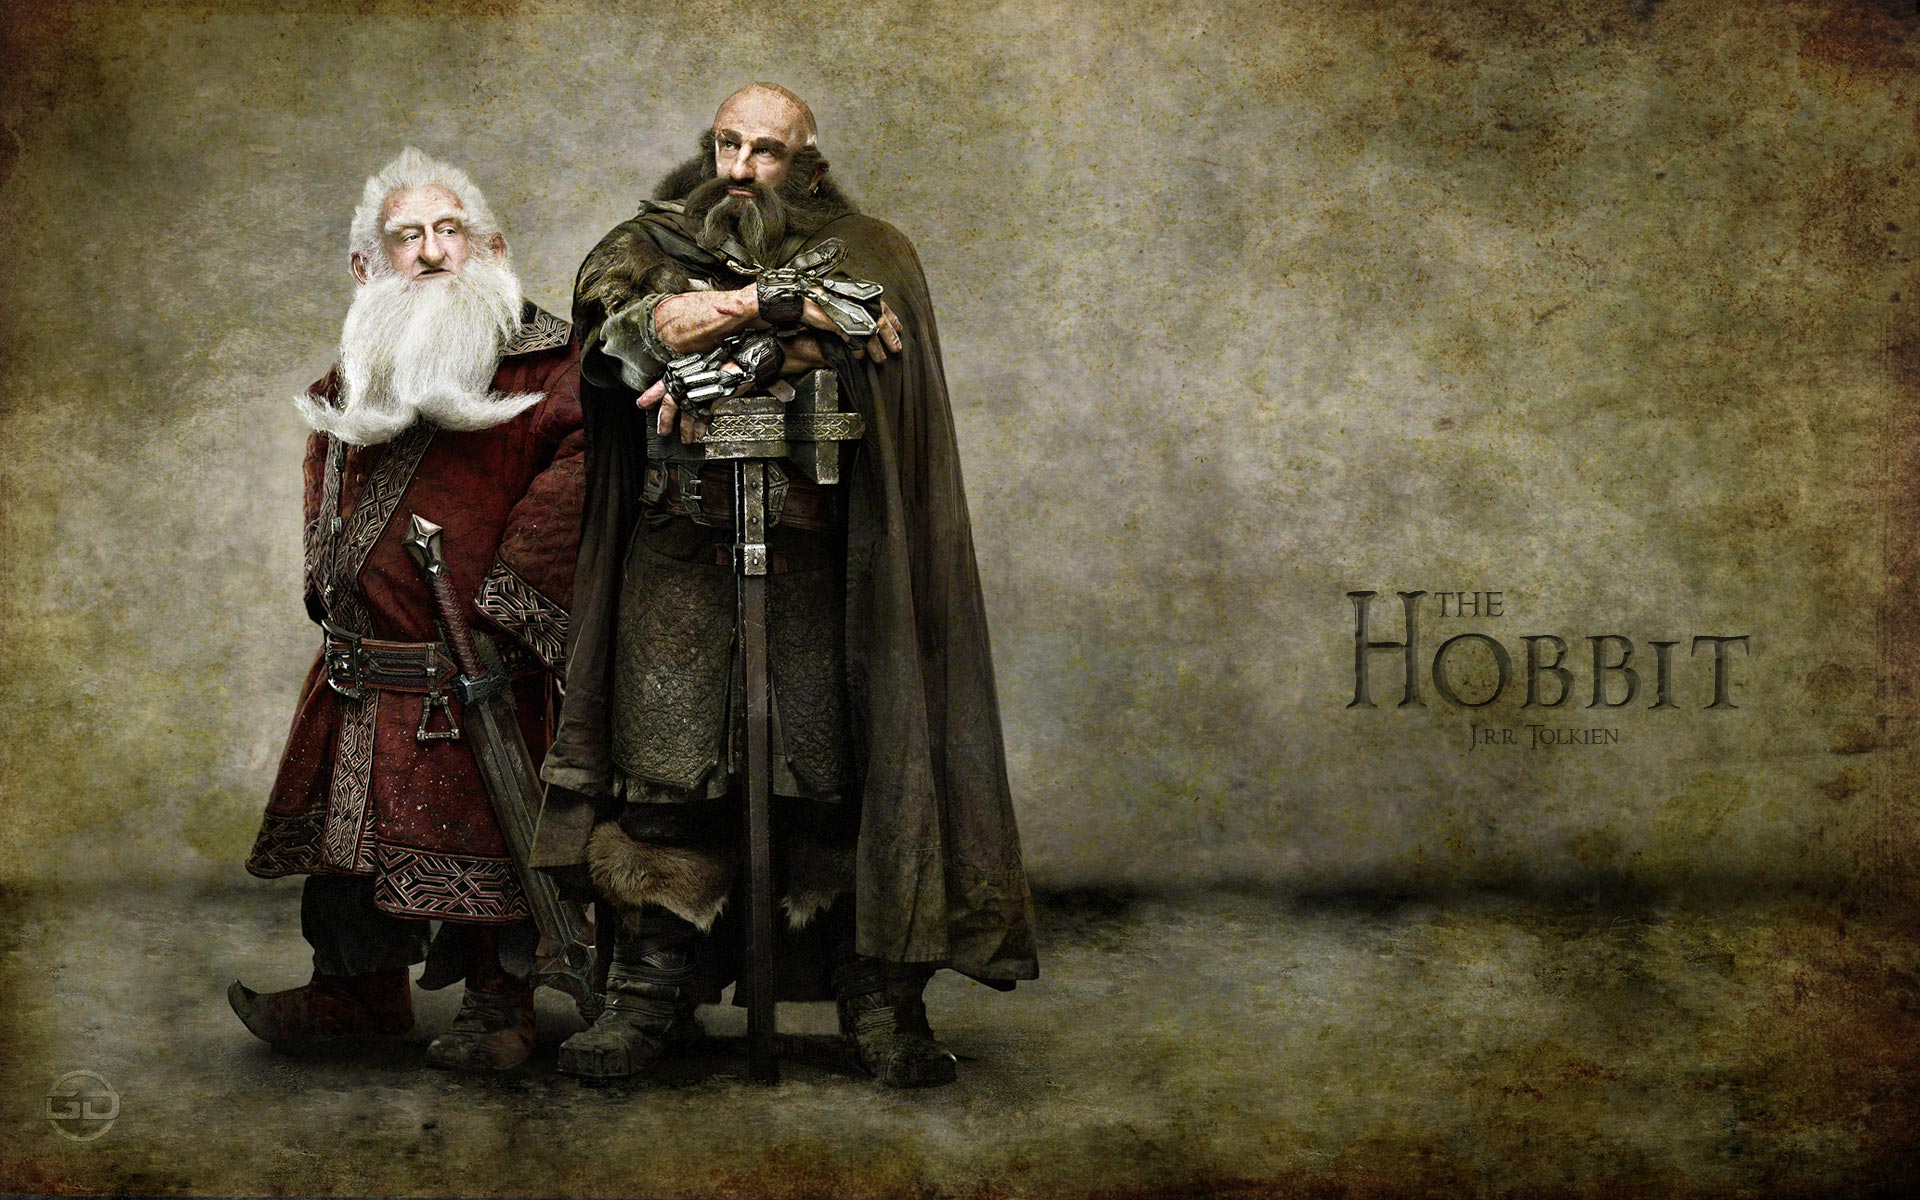 The Hobbit Movie Wallpapers 171 Awesome Wallpapers